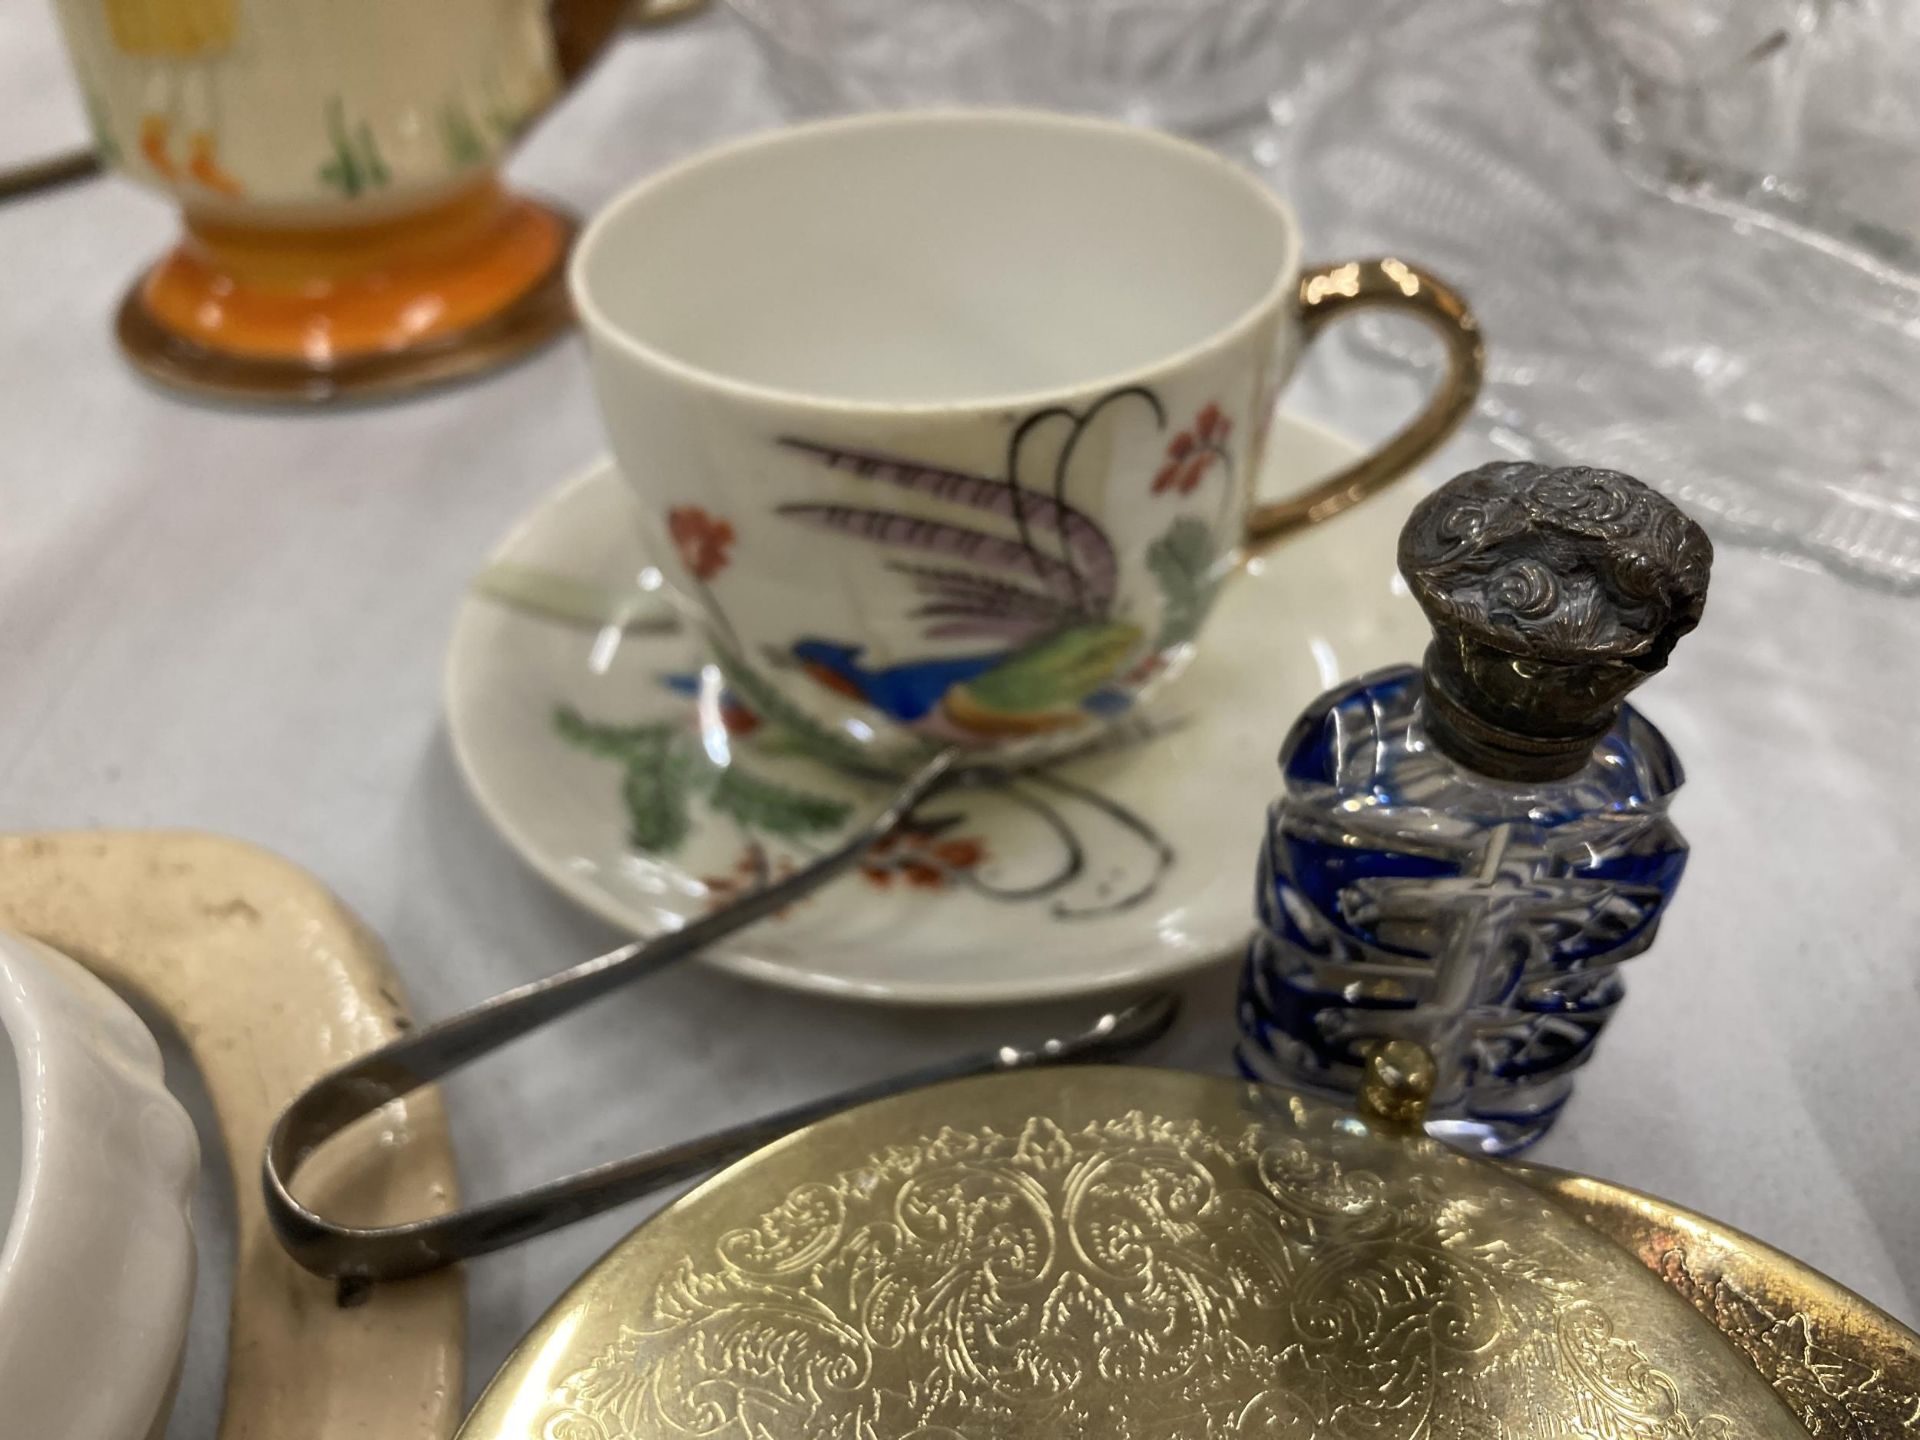 A MIXED VINTAGE LOT TO INCLUDE A MYOTT'S ART DECO JUG, GLASSWARE, A JAPANESE CUP AND SAUCER WITH - Image 5 of 6